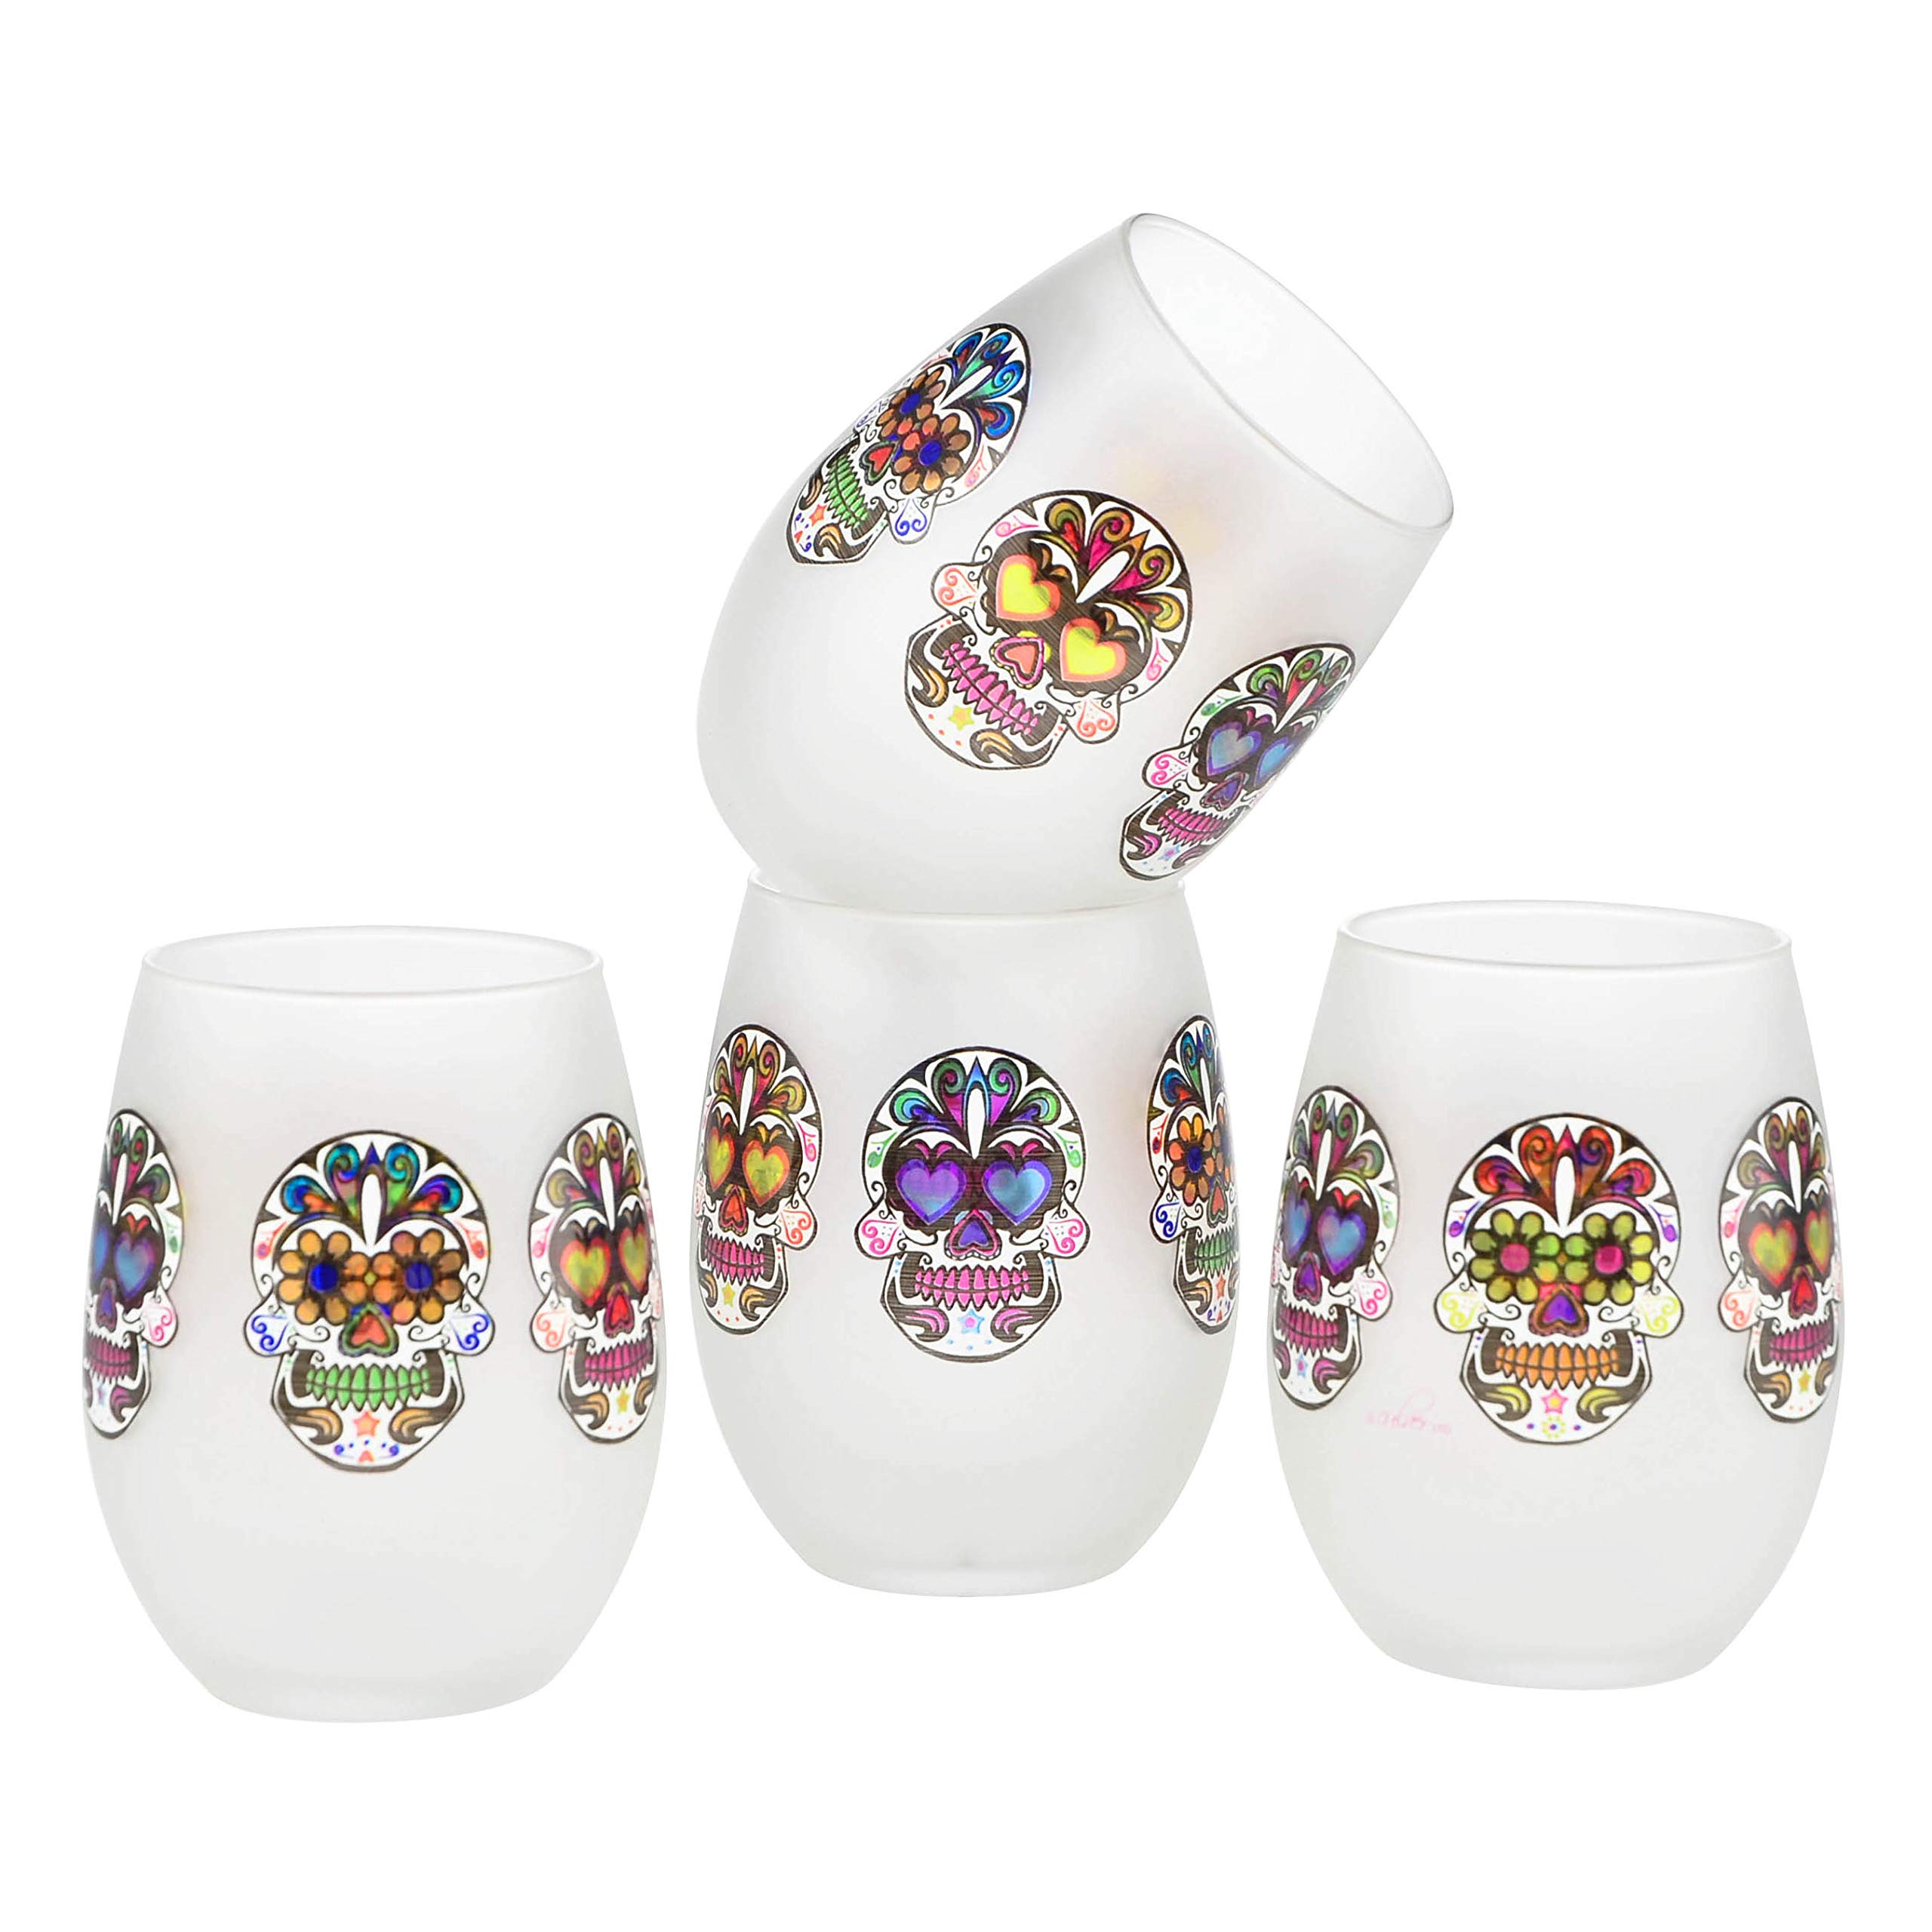 Culver Stemless Wine Glasses, 15-Ounce, Set of 4 Sugar Skulls (Frosted)